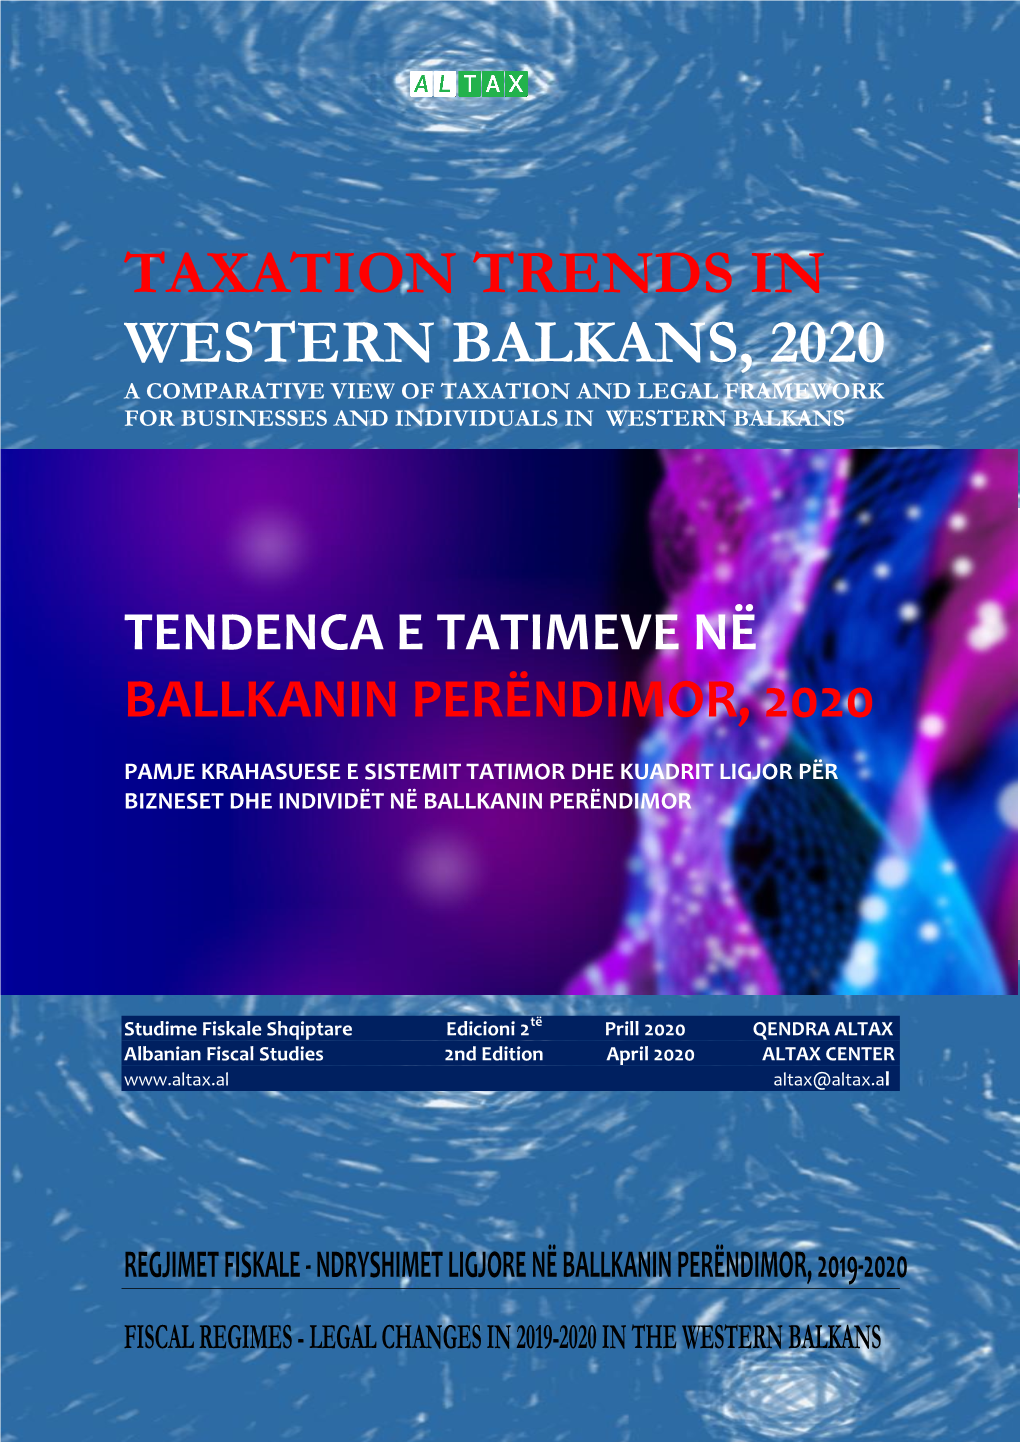 Taxation Trends in Western Balkans, 2020 a Comparative View of Taxation and Legal Framework for Businesses and Individuals in Western Balkans